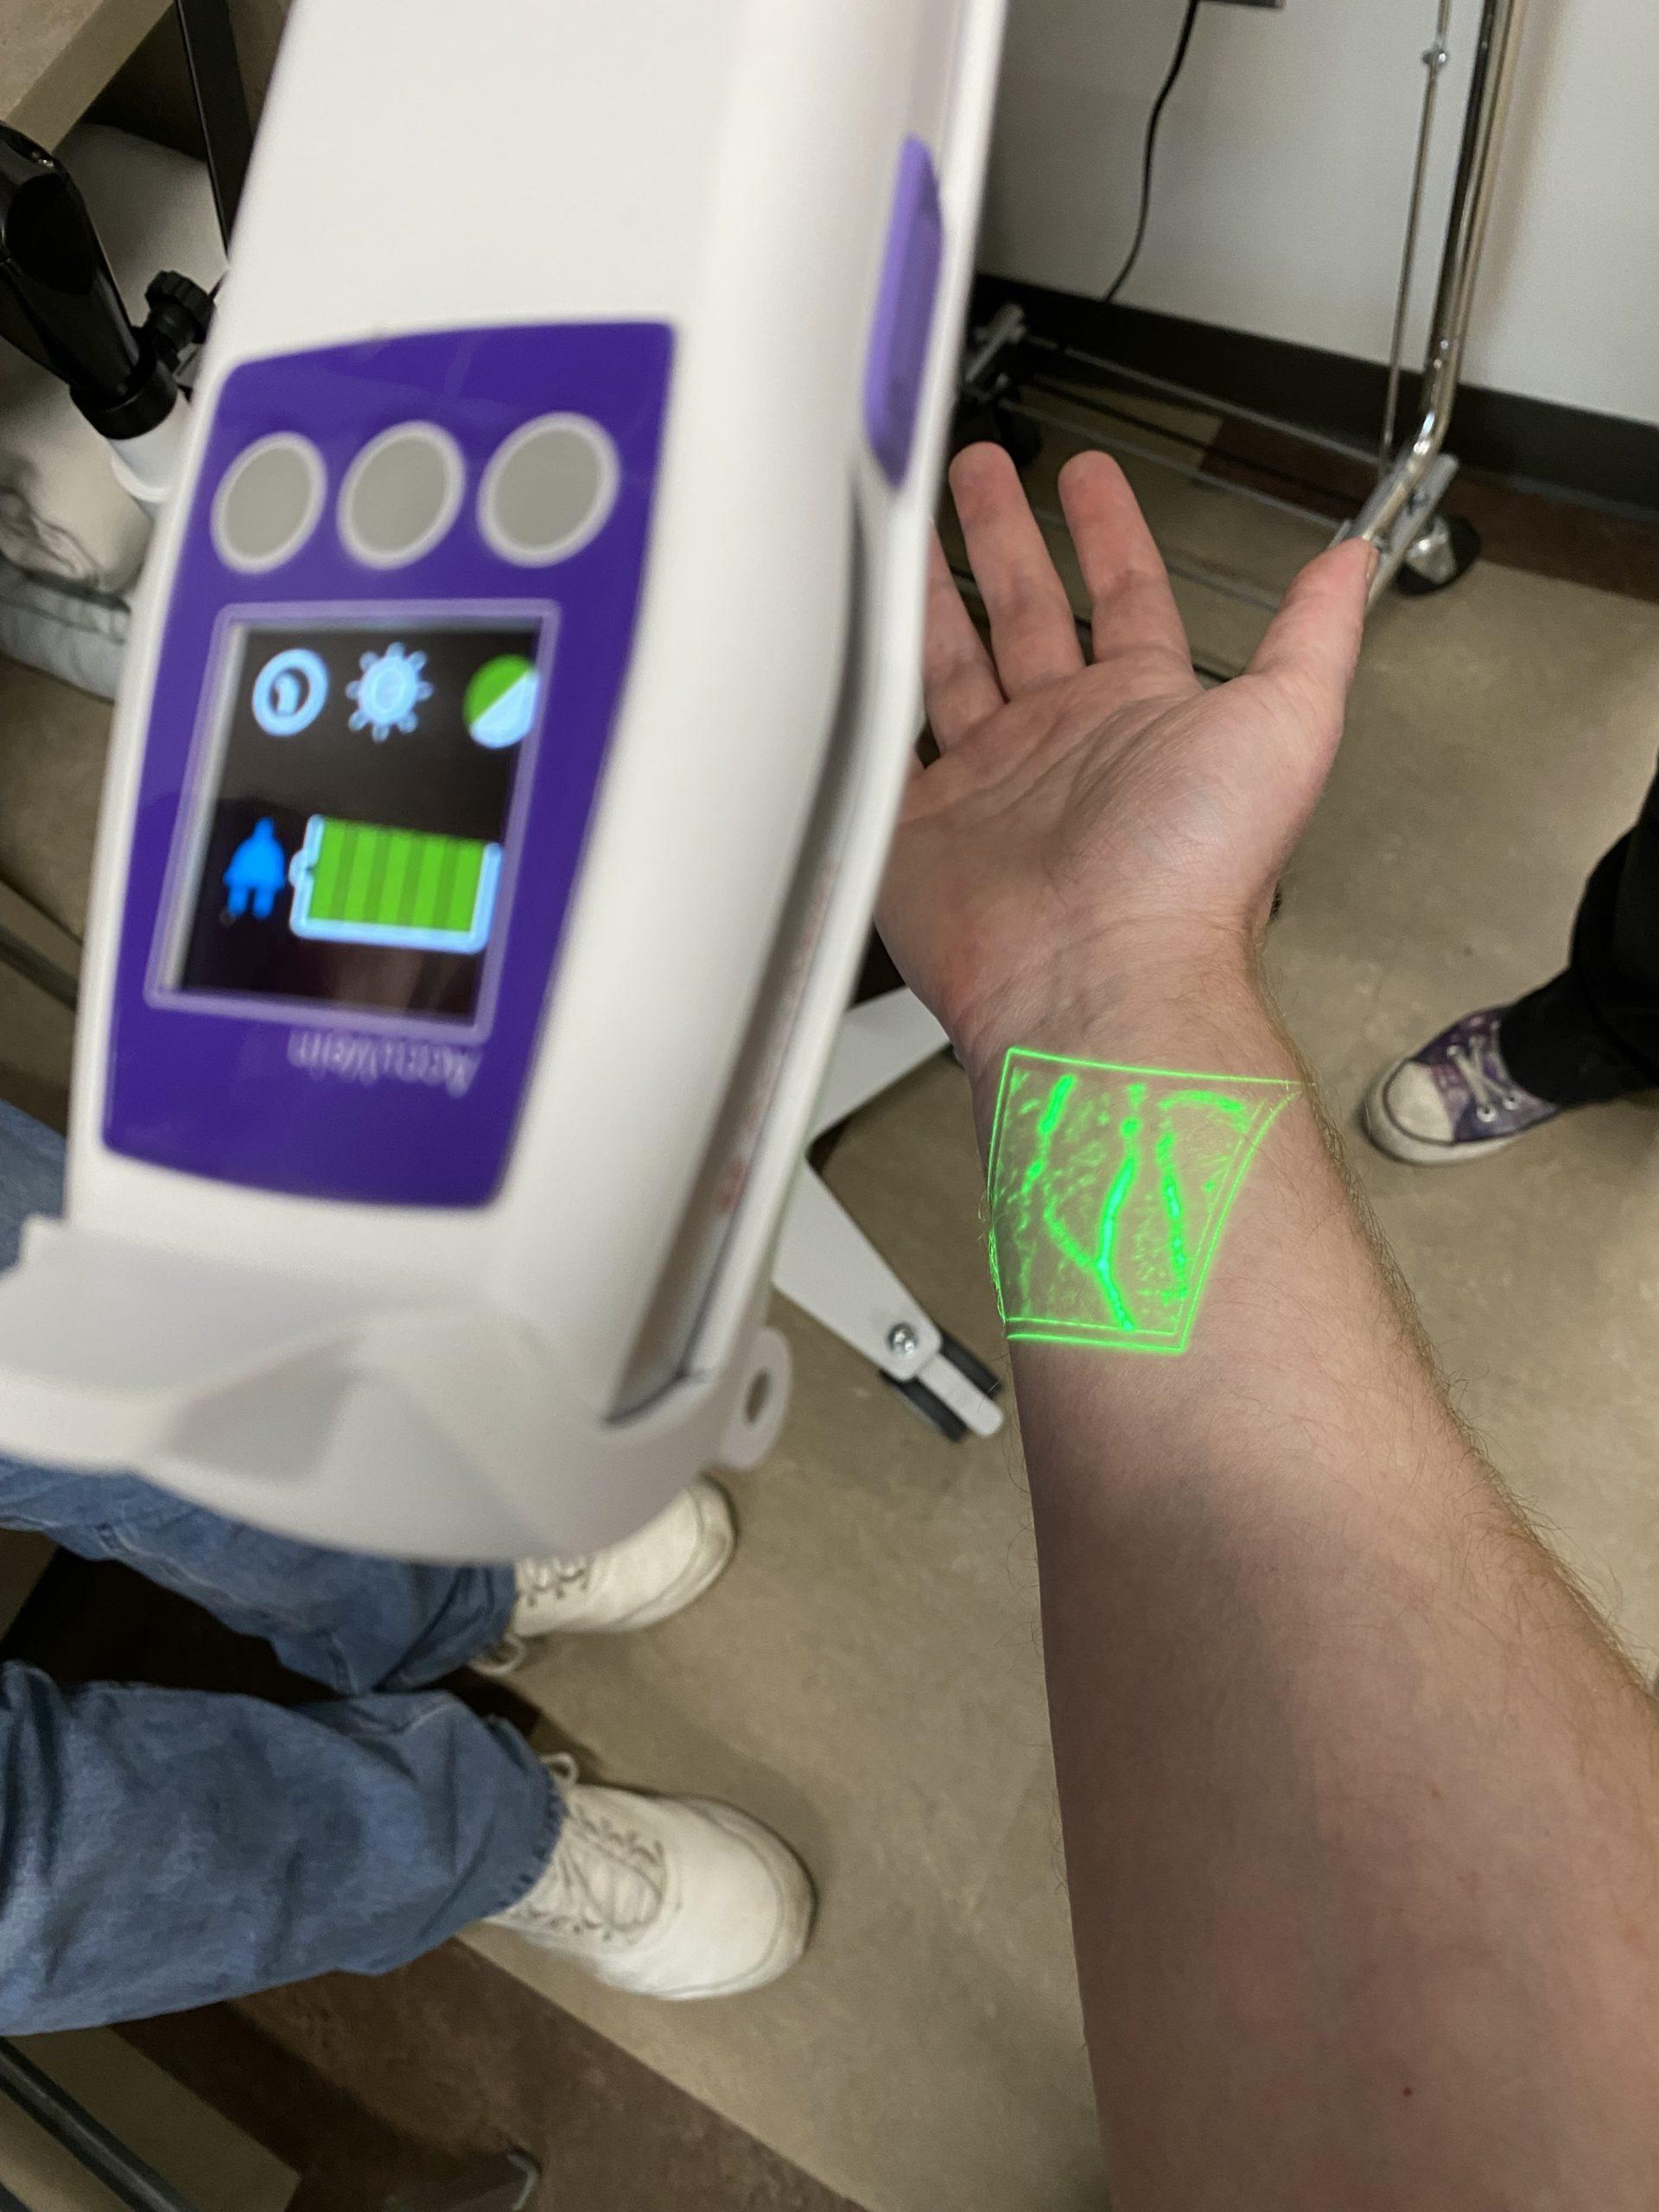 My arm, held palm up, underneath a white and purple device that is projecting a green image on my arm that shows exactly where my veins are.